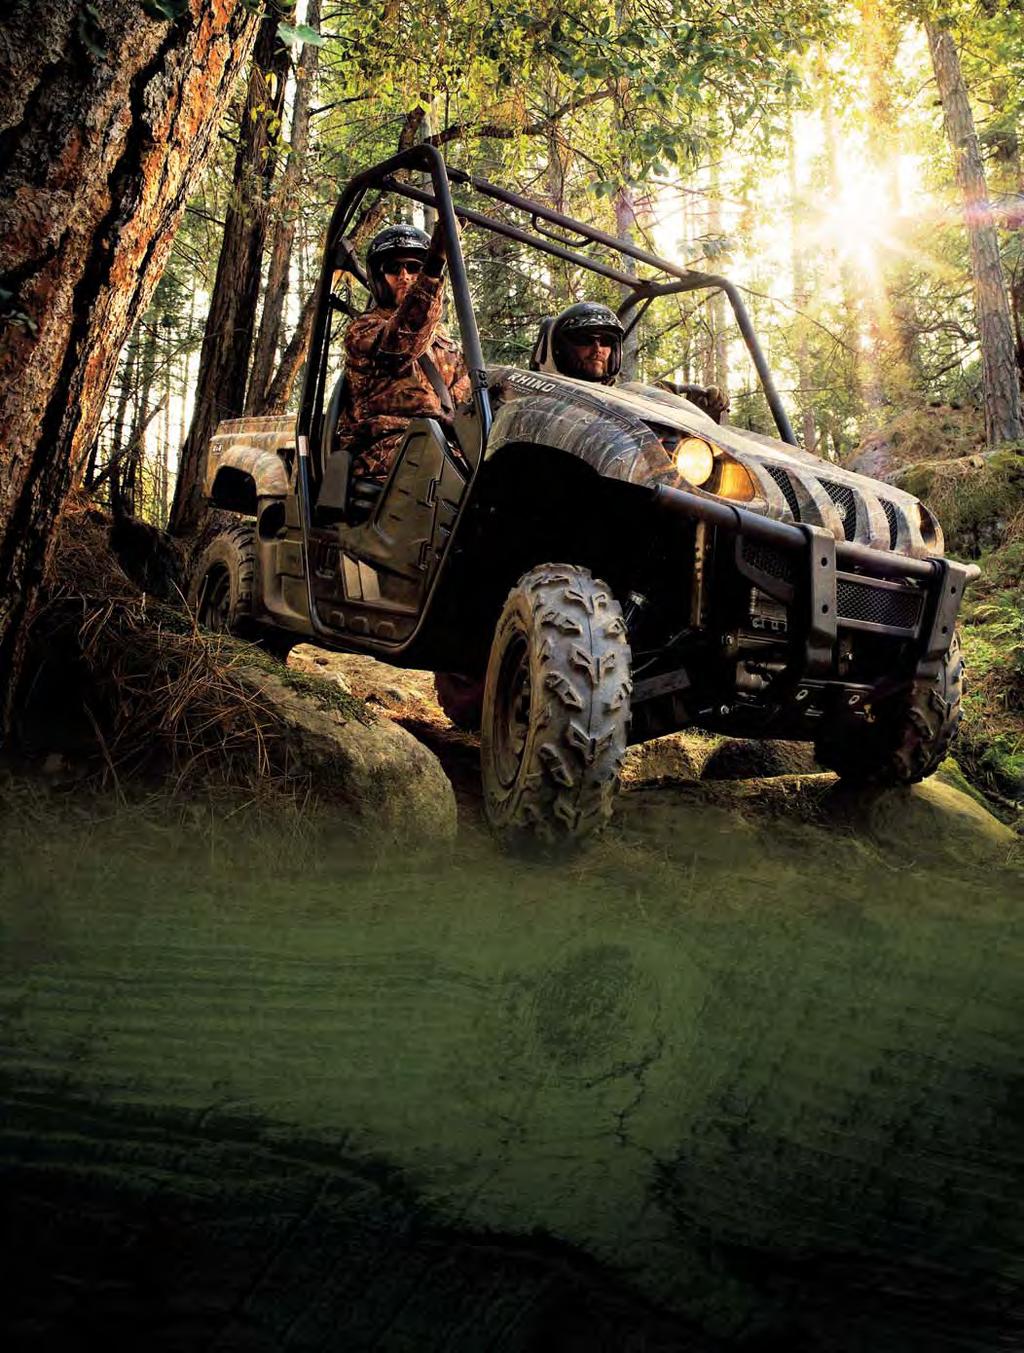 ATVs can damage natural resources and